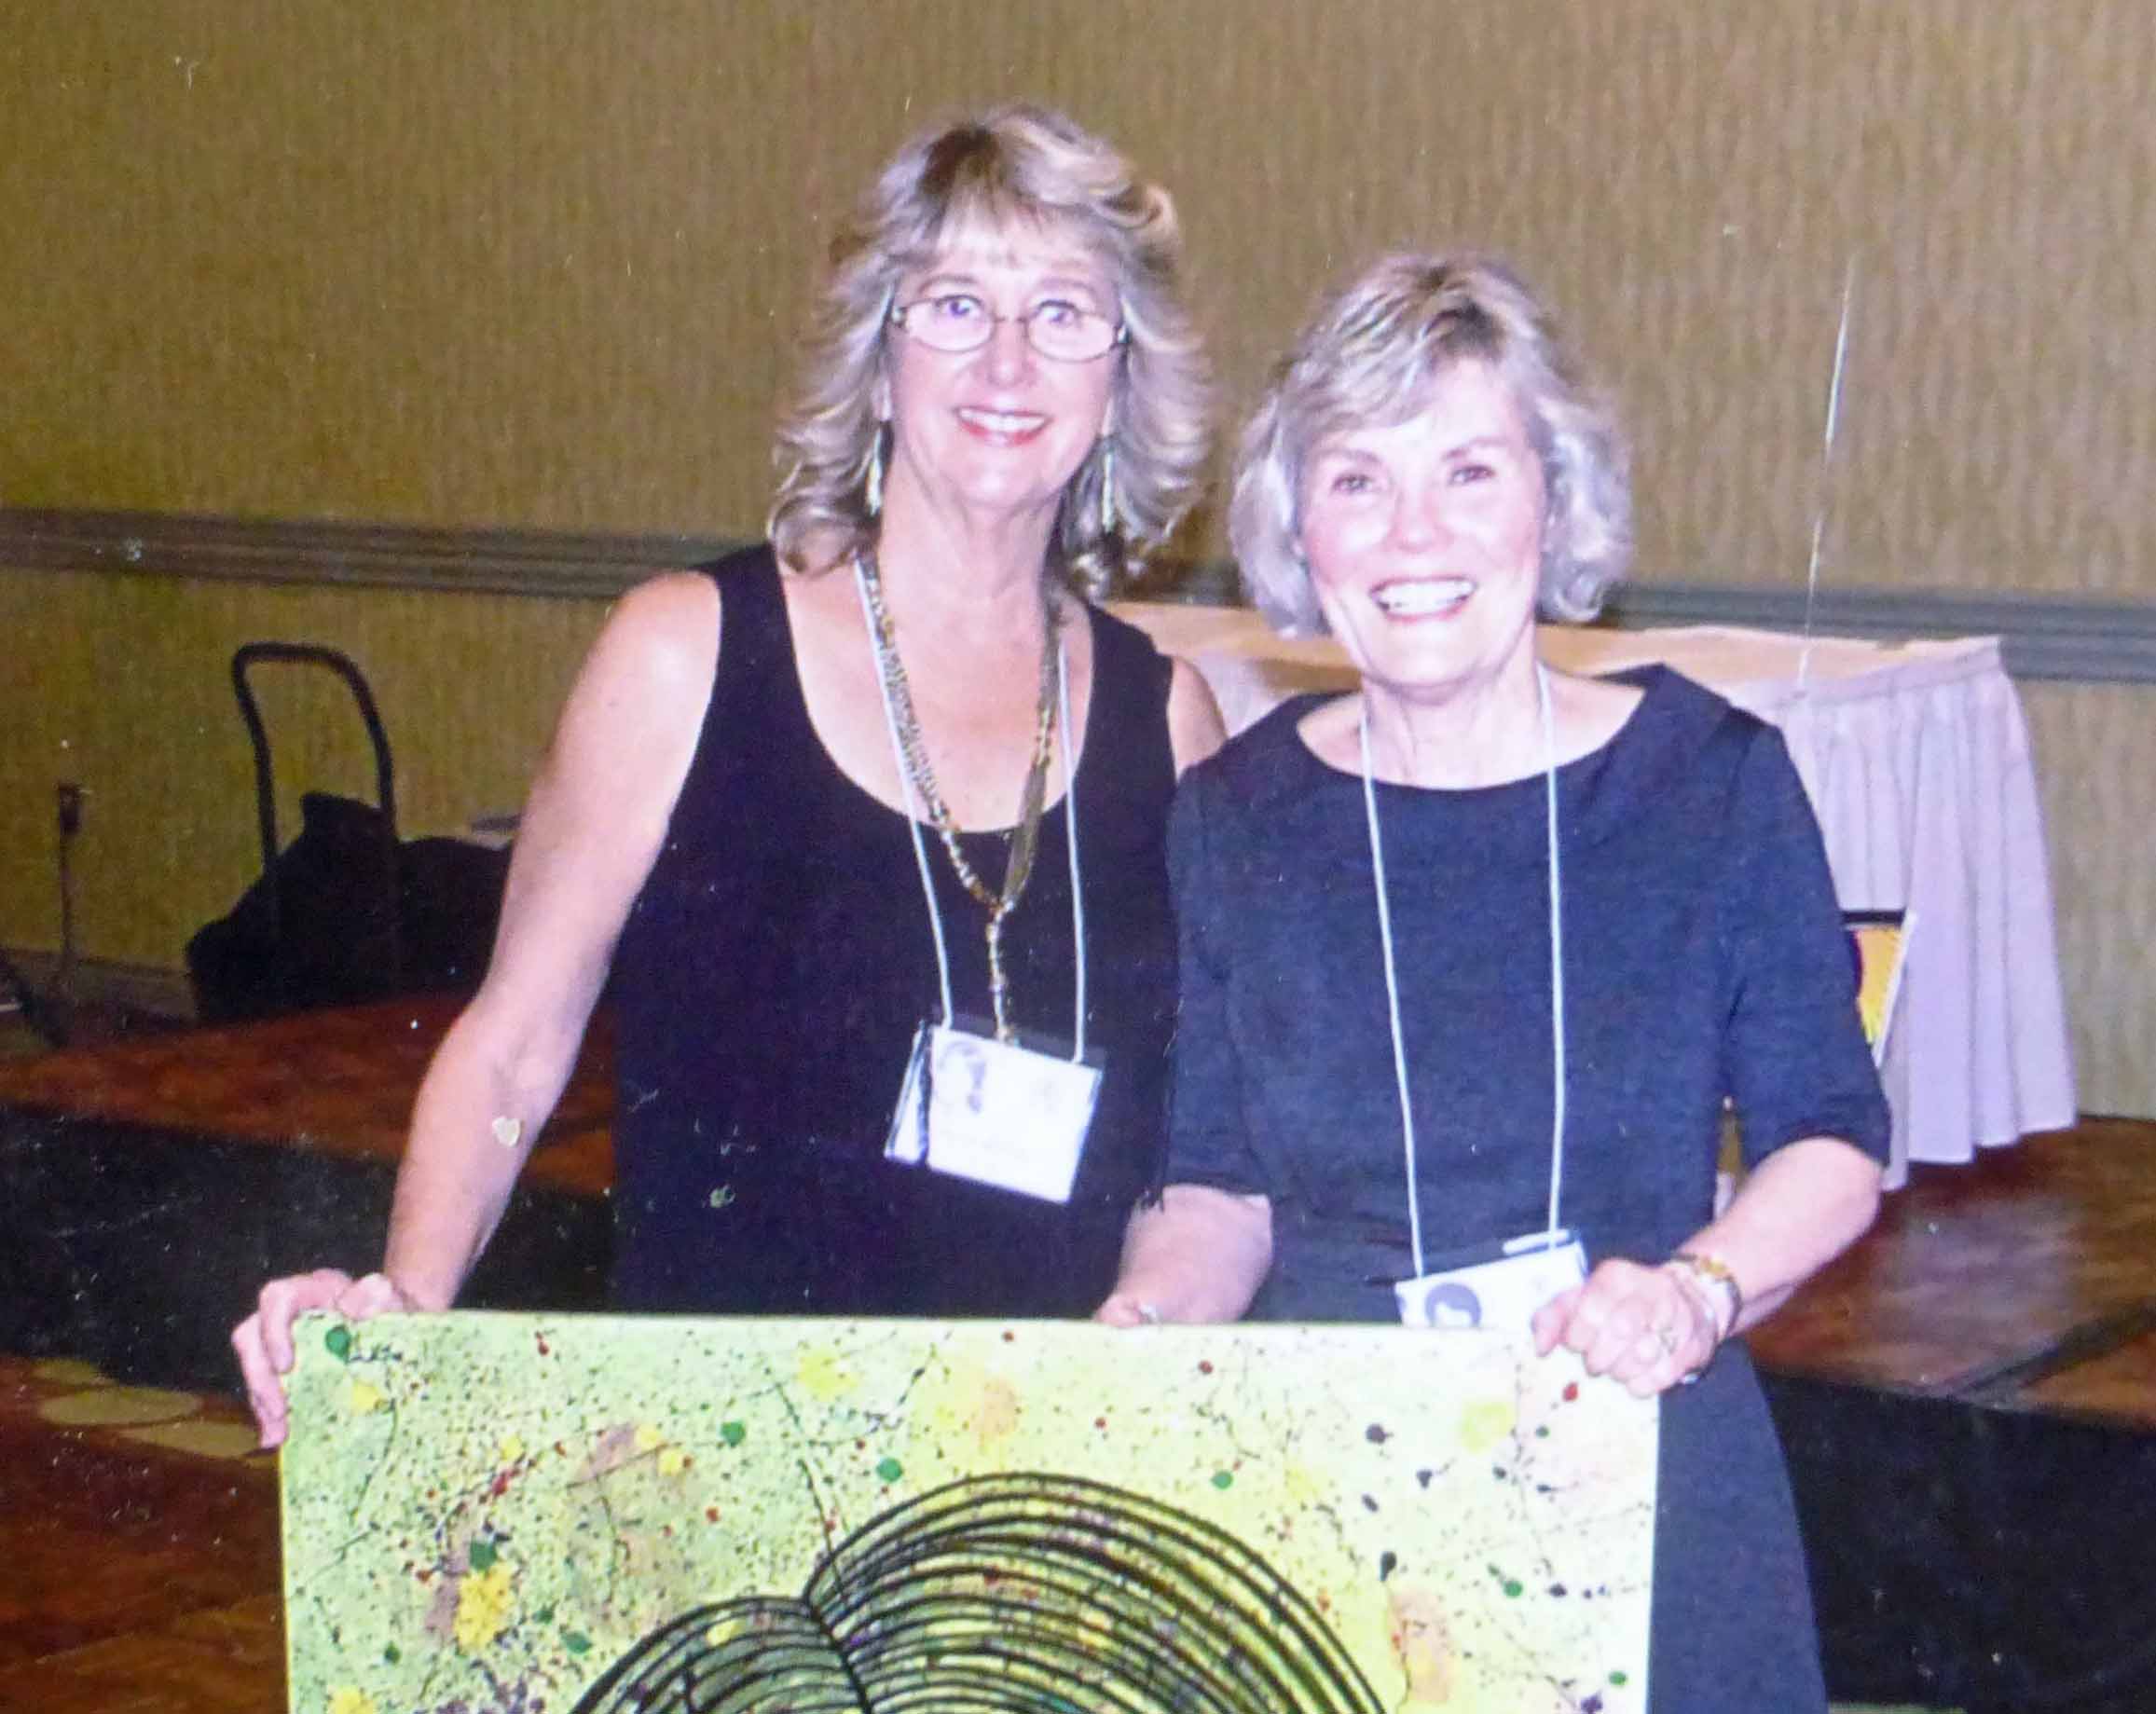 Kathy Trorey Long won a raffle prize (picture painted by Barry Bullard) presented by Anne Adams Goodwin.